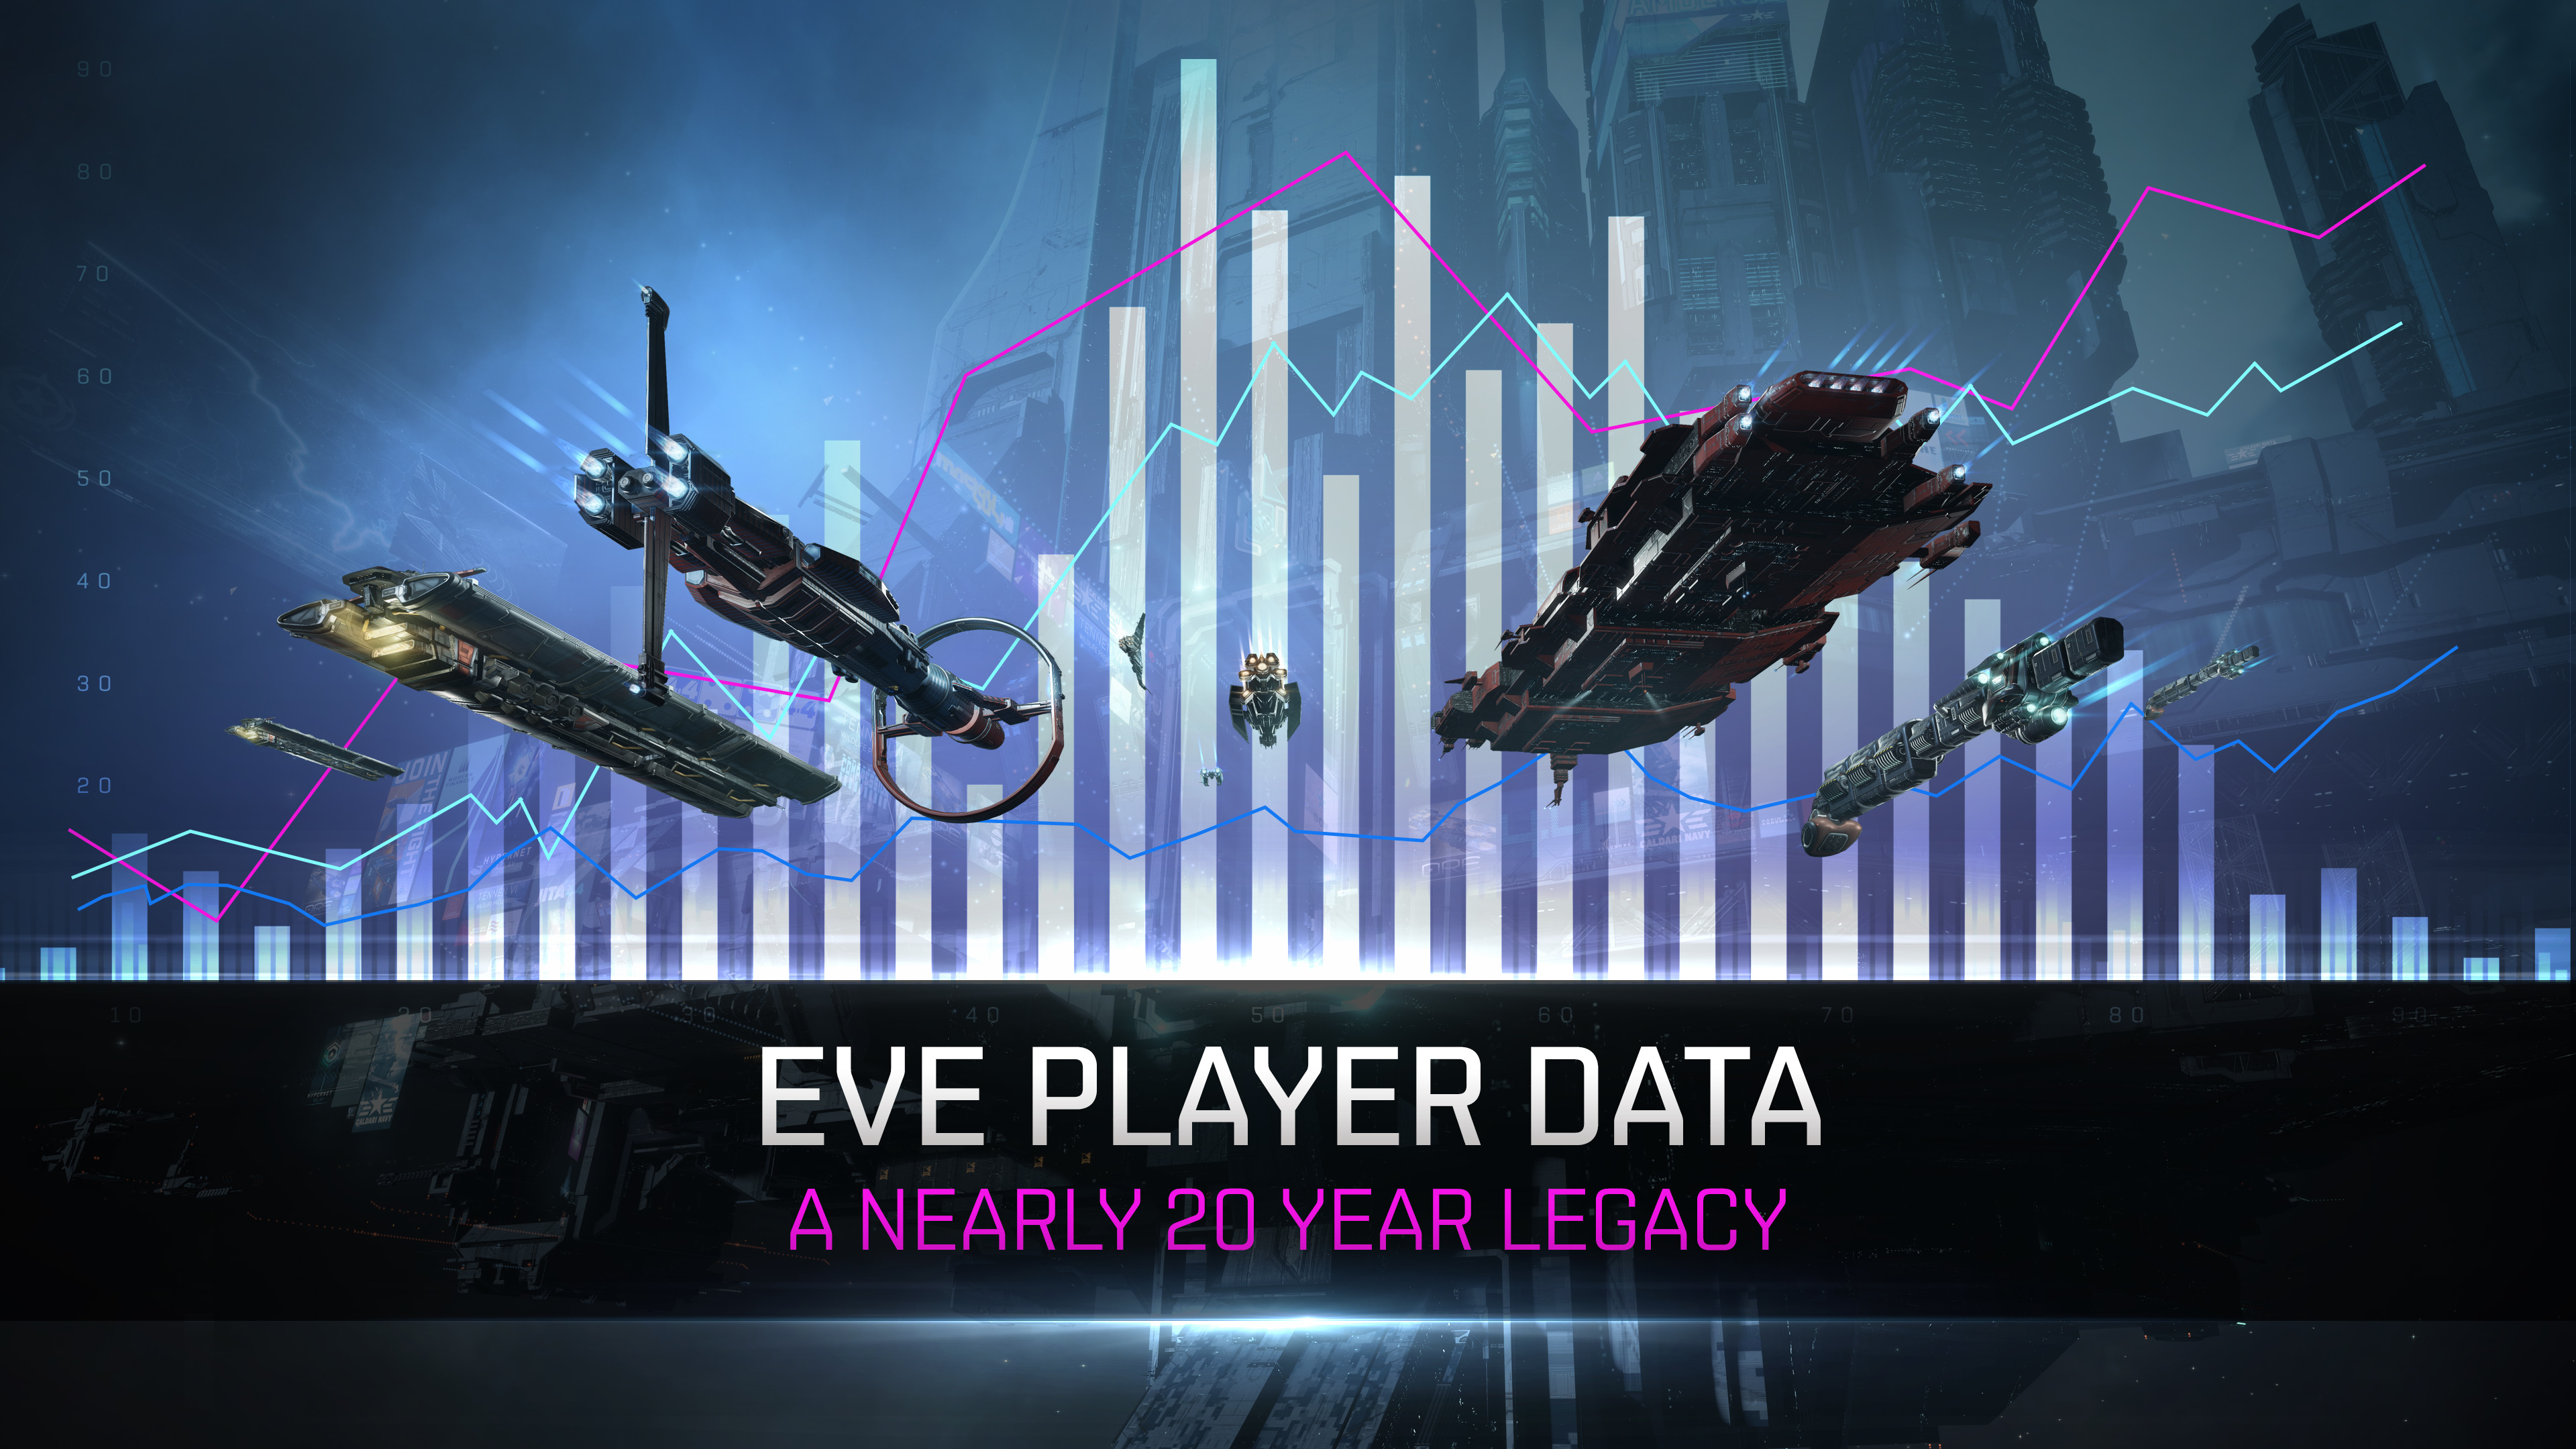 EVE Online - SteamSpy - All the data and stats about Steam games